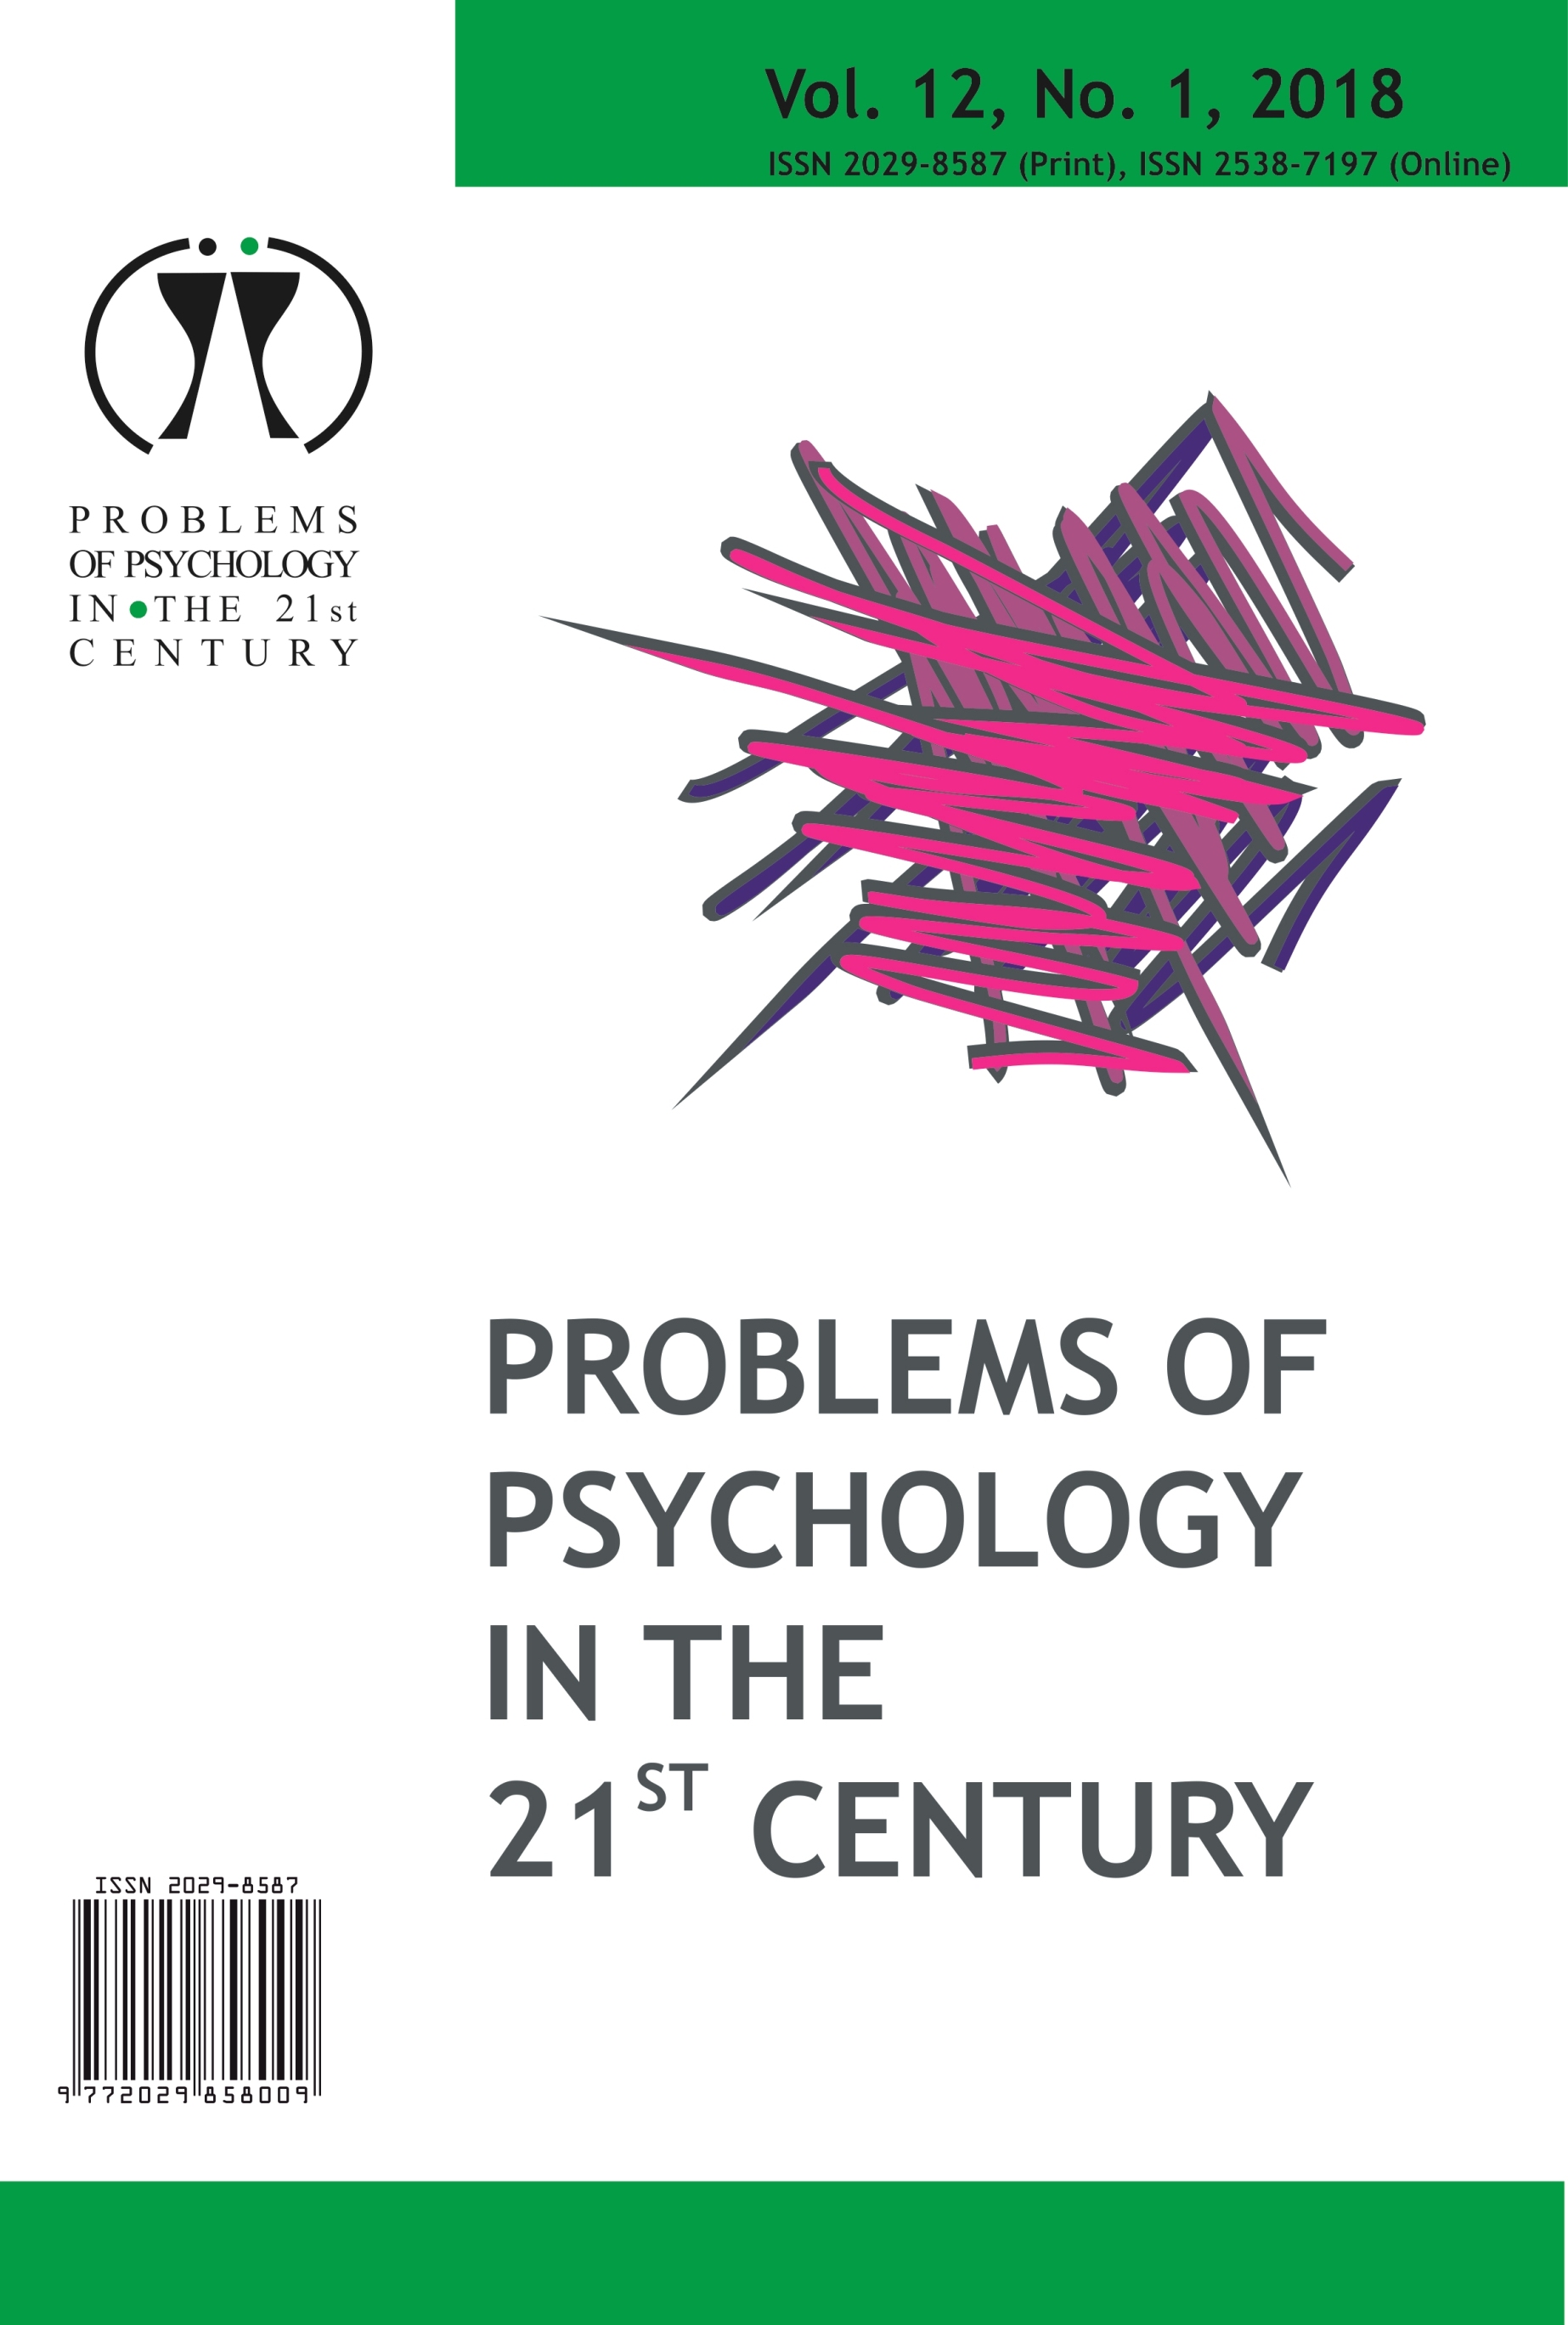 THE ROLE OF BLOG PSYCHOLOGY IN ONLINE MENTAL HEALTH MOVEMENT: CURRENT STATUS AND IMPLICATIONS